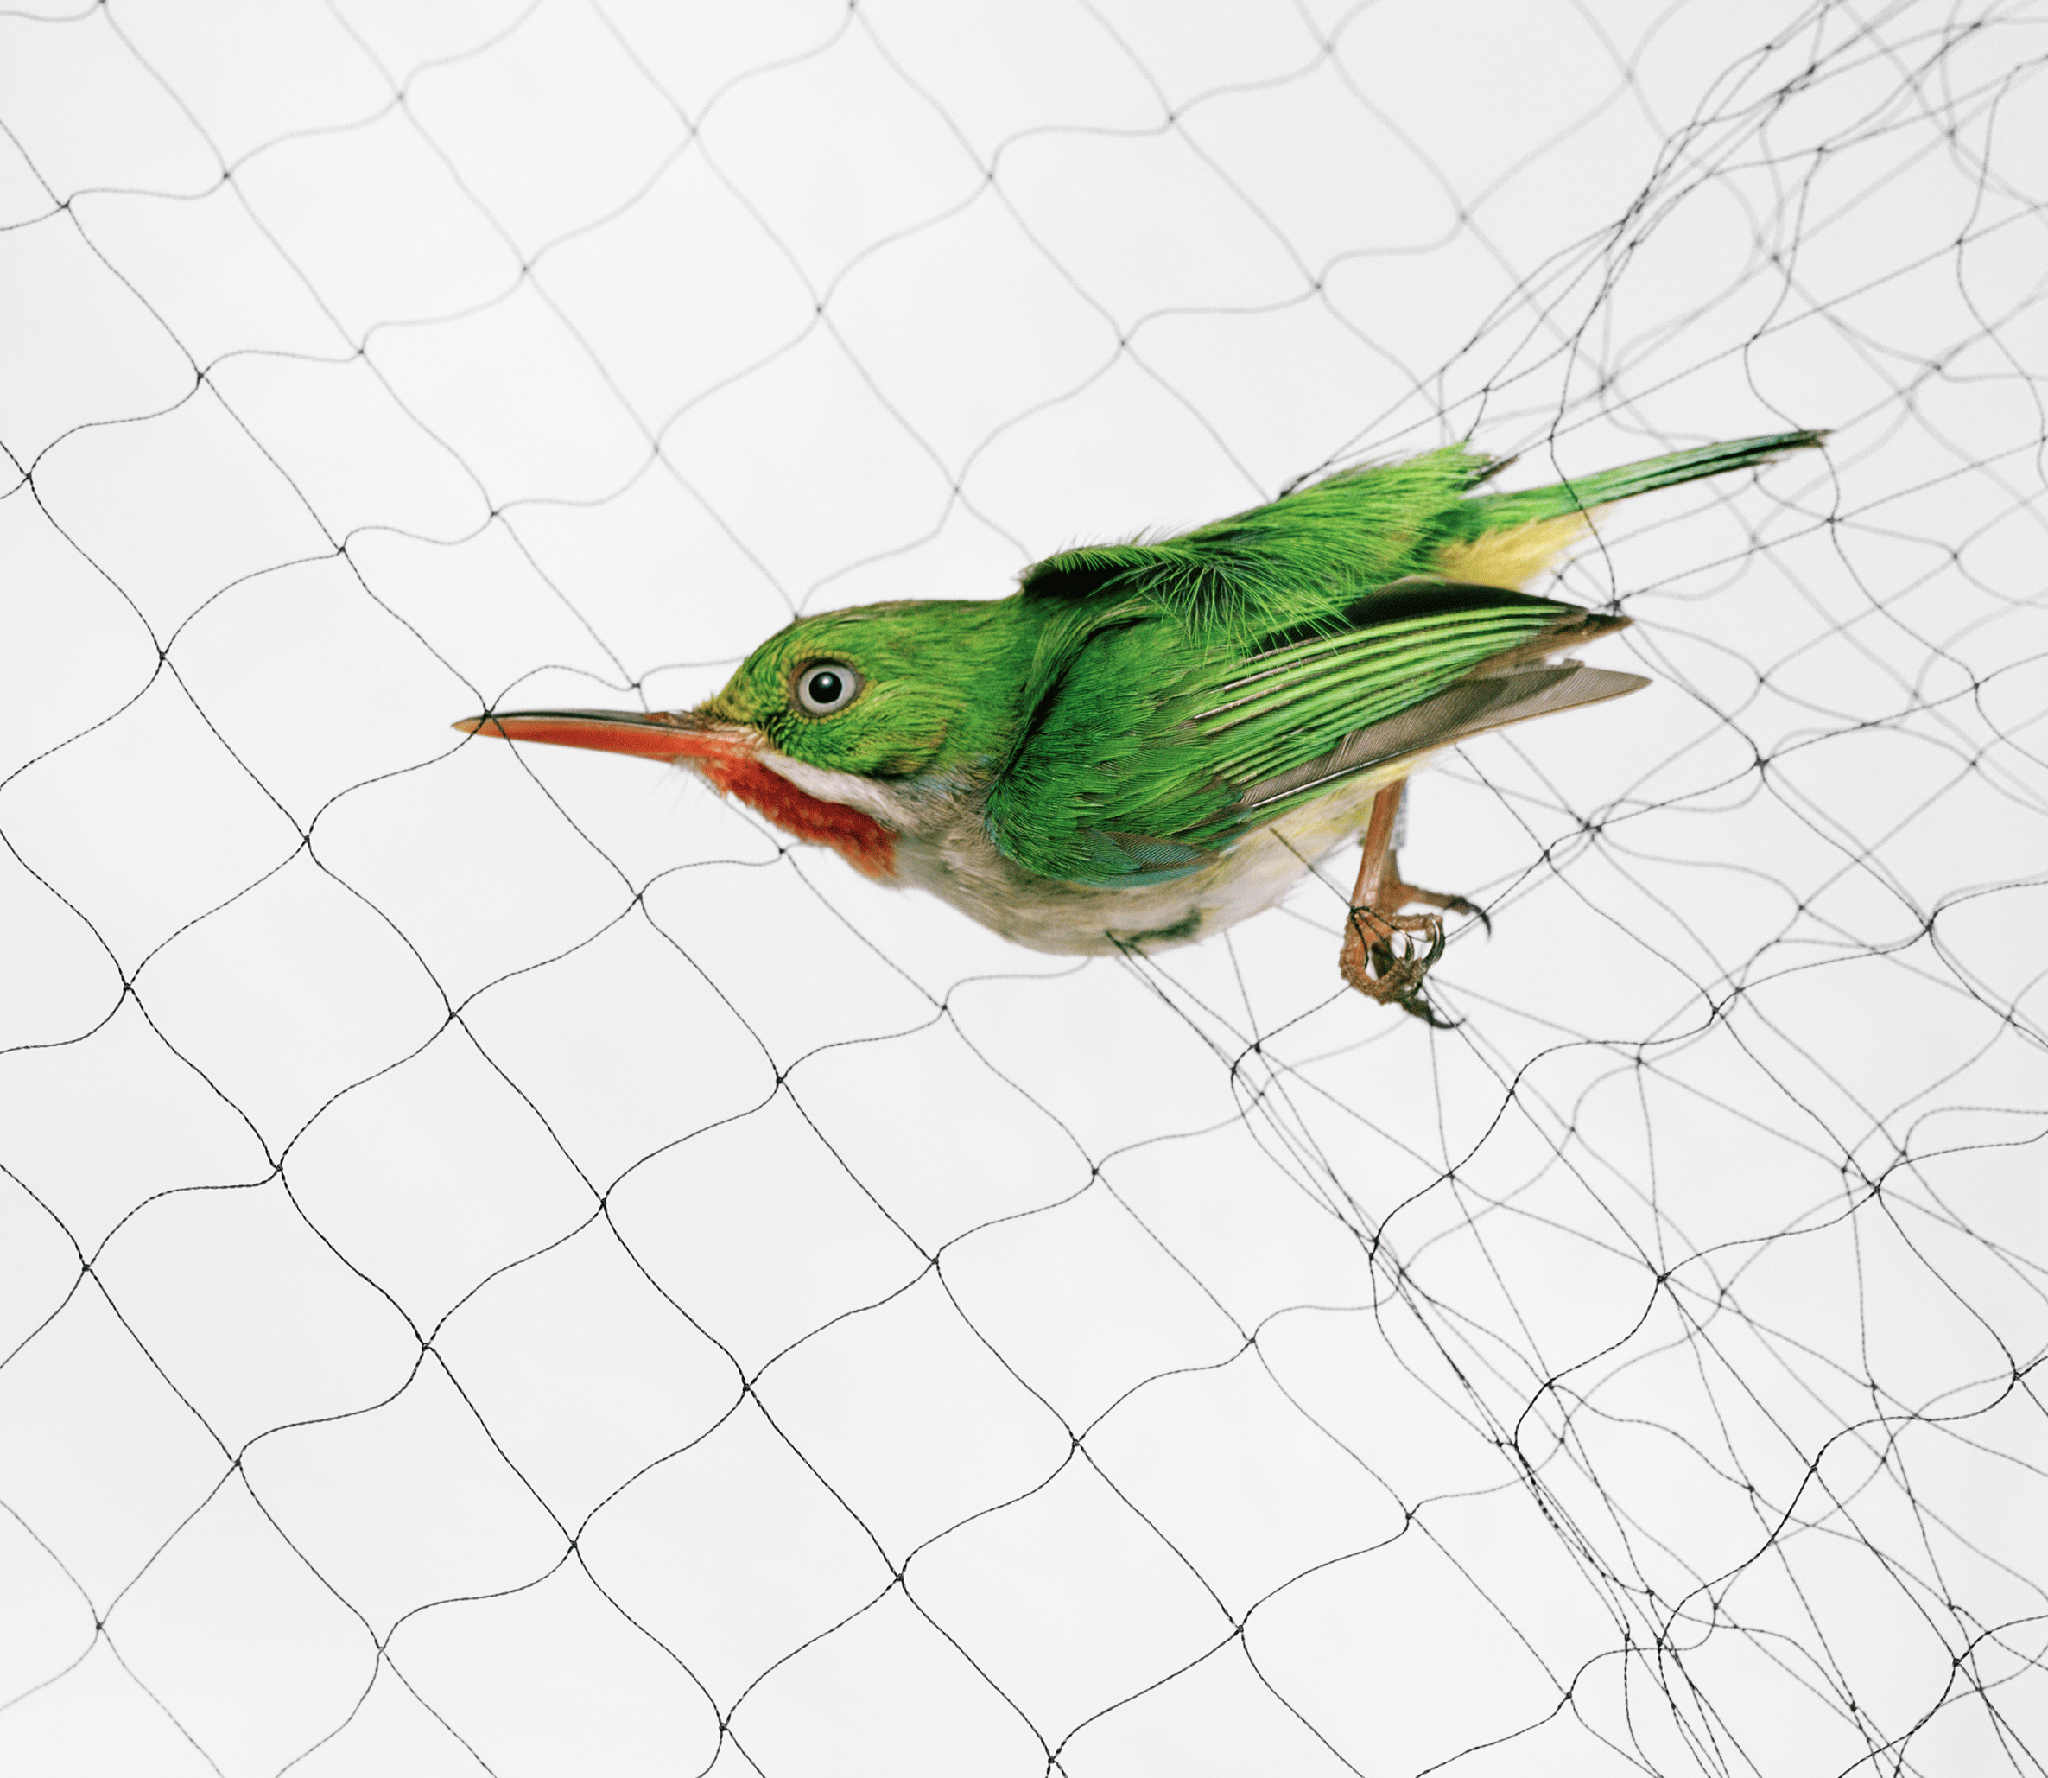 bird caught in a net

yellow bird caught in a net

photographs by todd forsgren

do not use, only for cosmo feature use